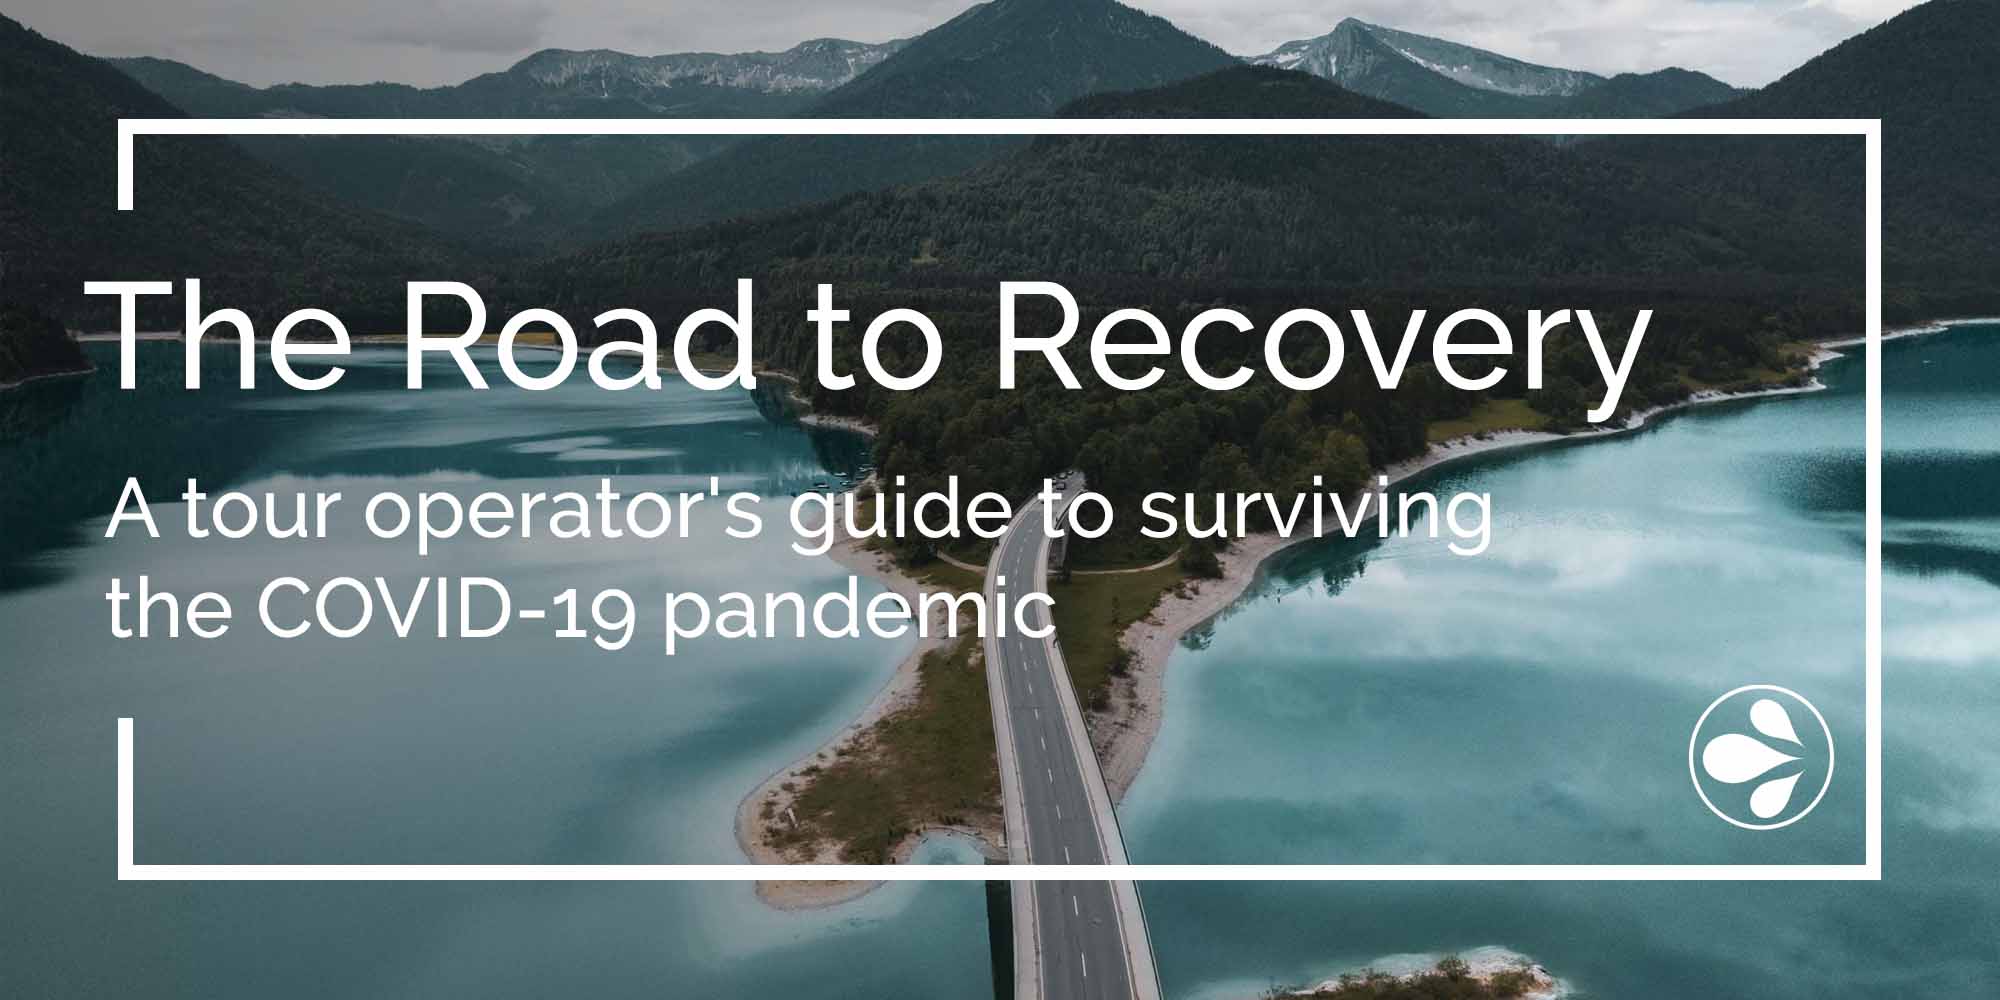 The road to recovery: A tour operator’s guide to surviving the COVID-19 pandemic